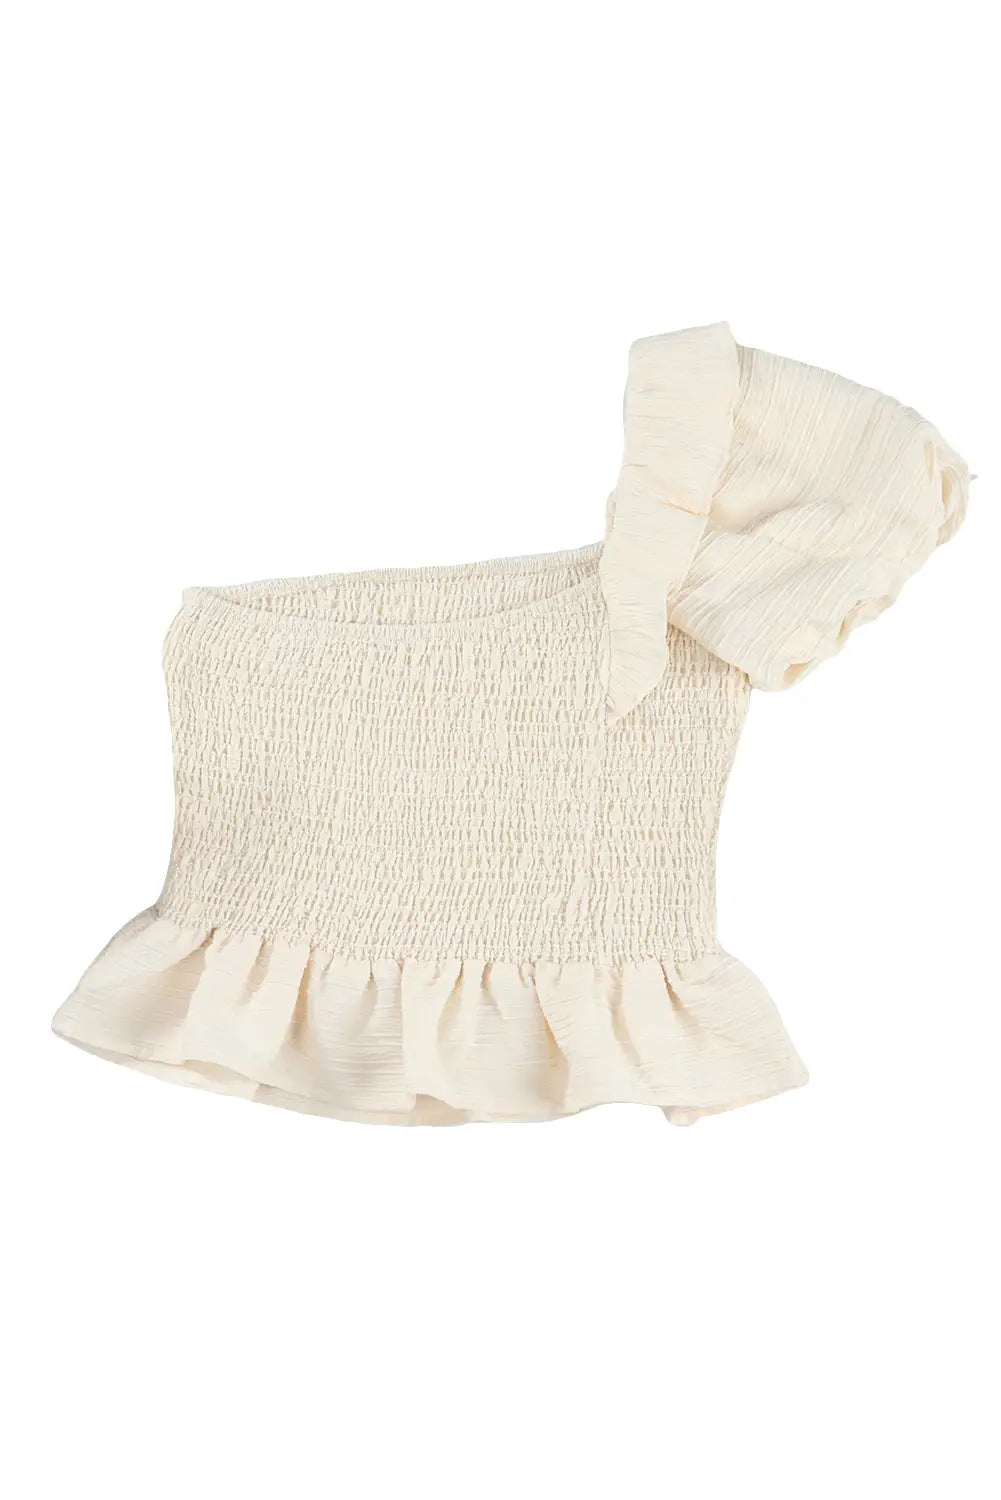 Apricot ruffled one-shoulder smocked top - tops